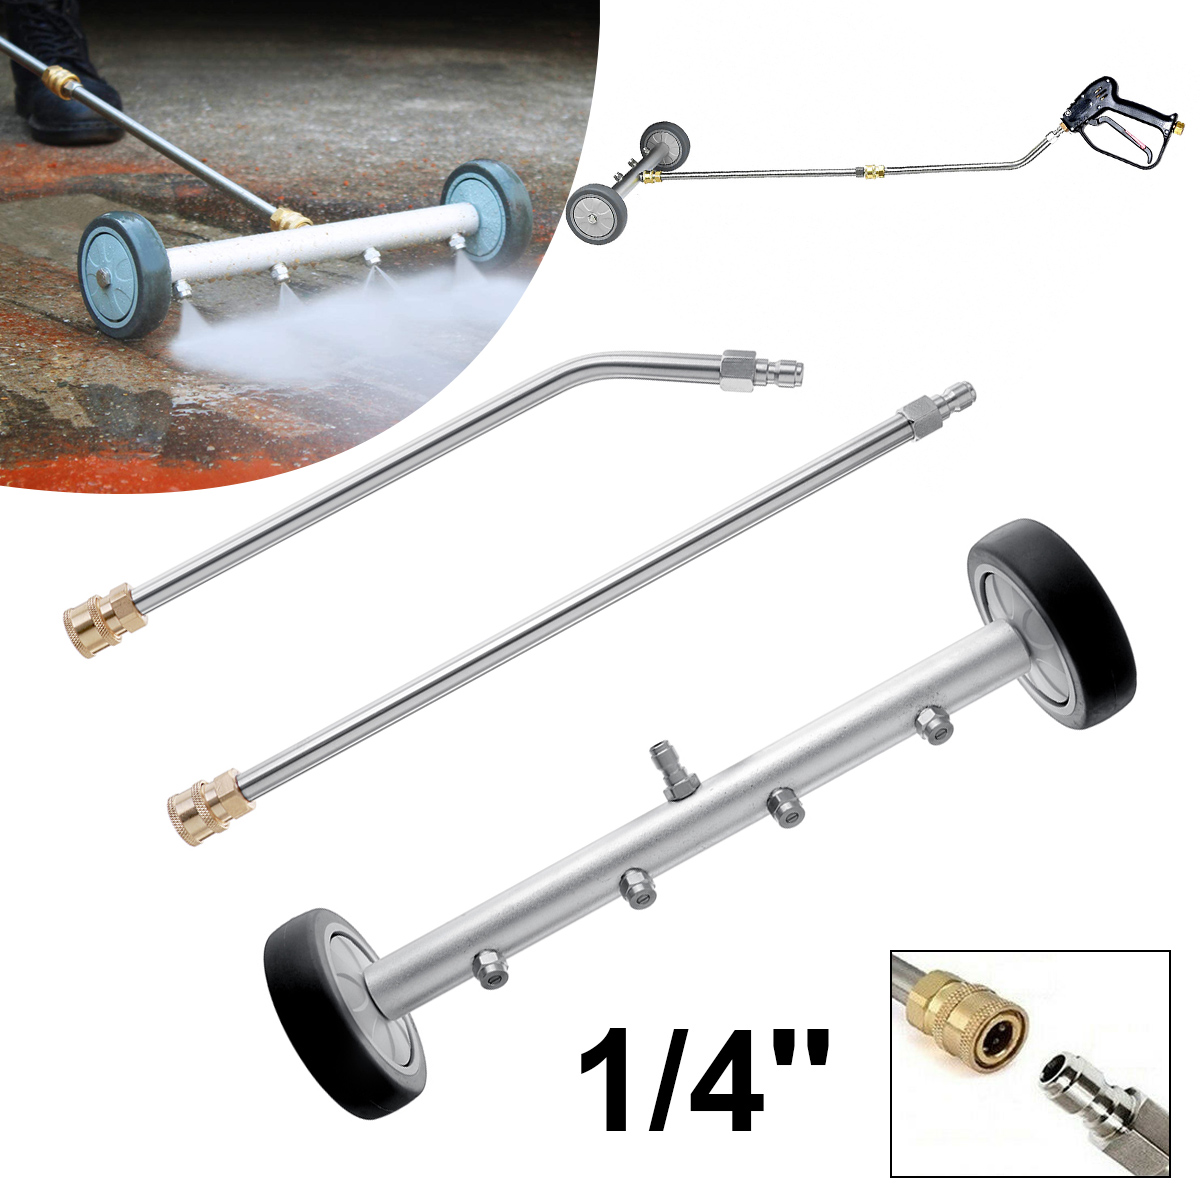 2-IN-1-Pressure-Washer-Undercarriage-Cleaner-4000PSI-Underbody-Car-Wash-Broom-US-1936837-3